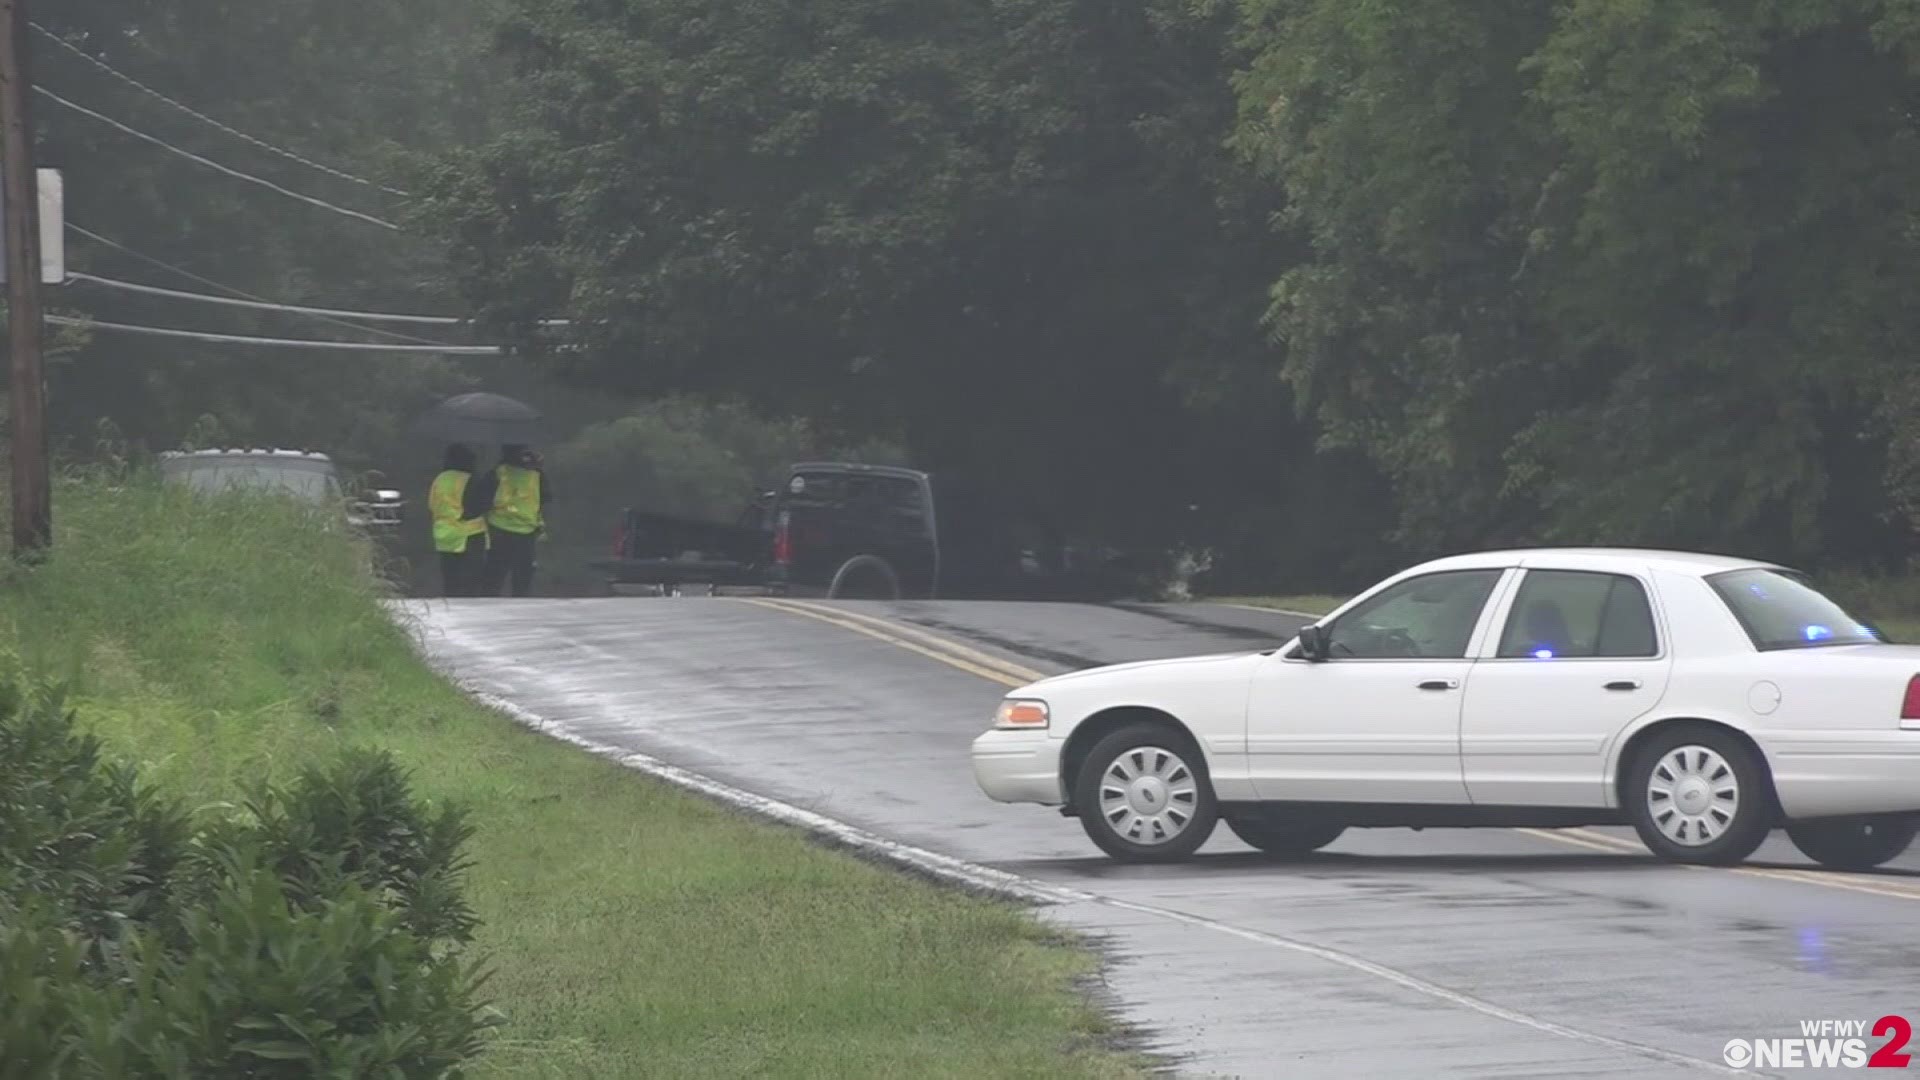 An 18-year-old died in a crash Tuesday morning on Clemmonsville Road in Winston-Salem.